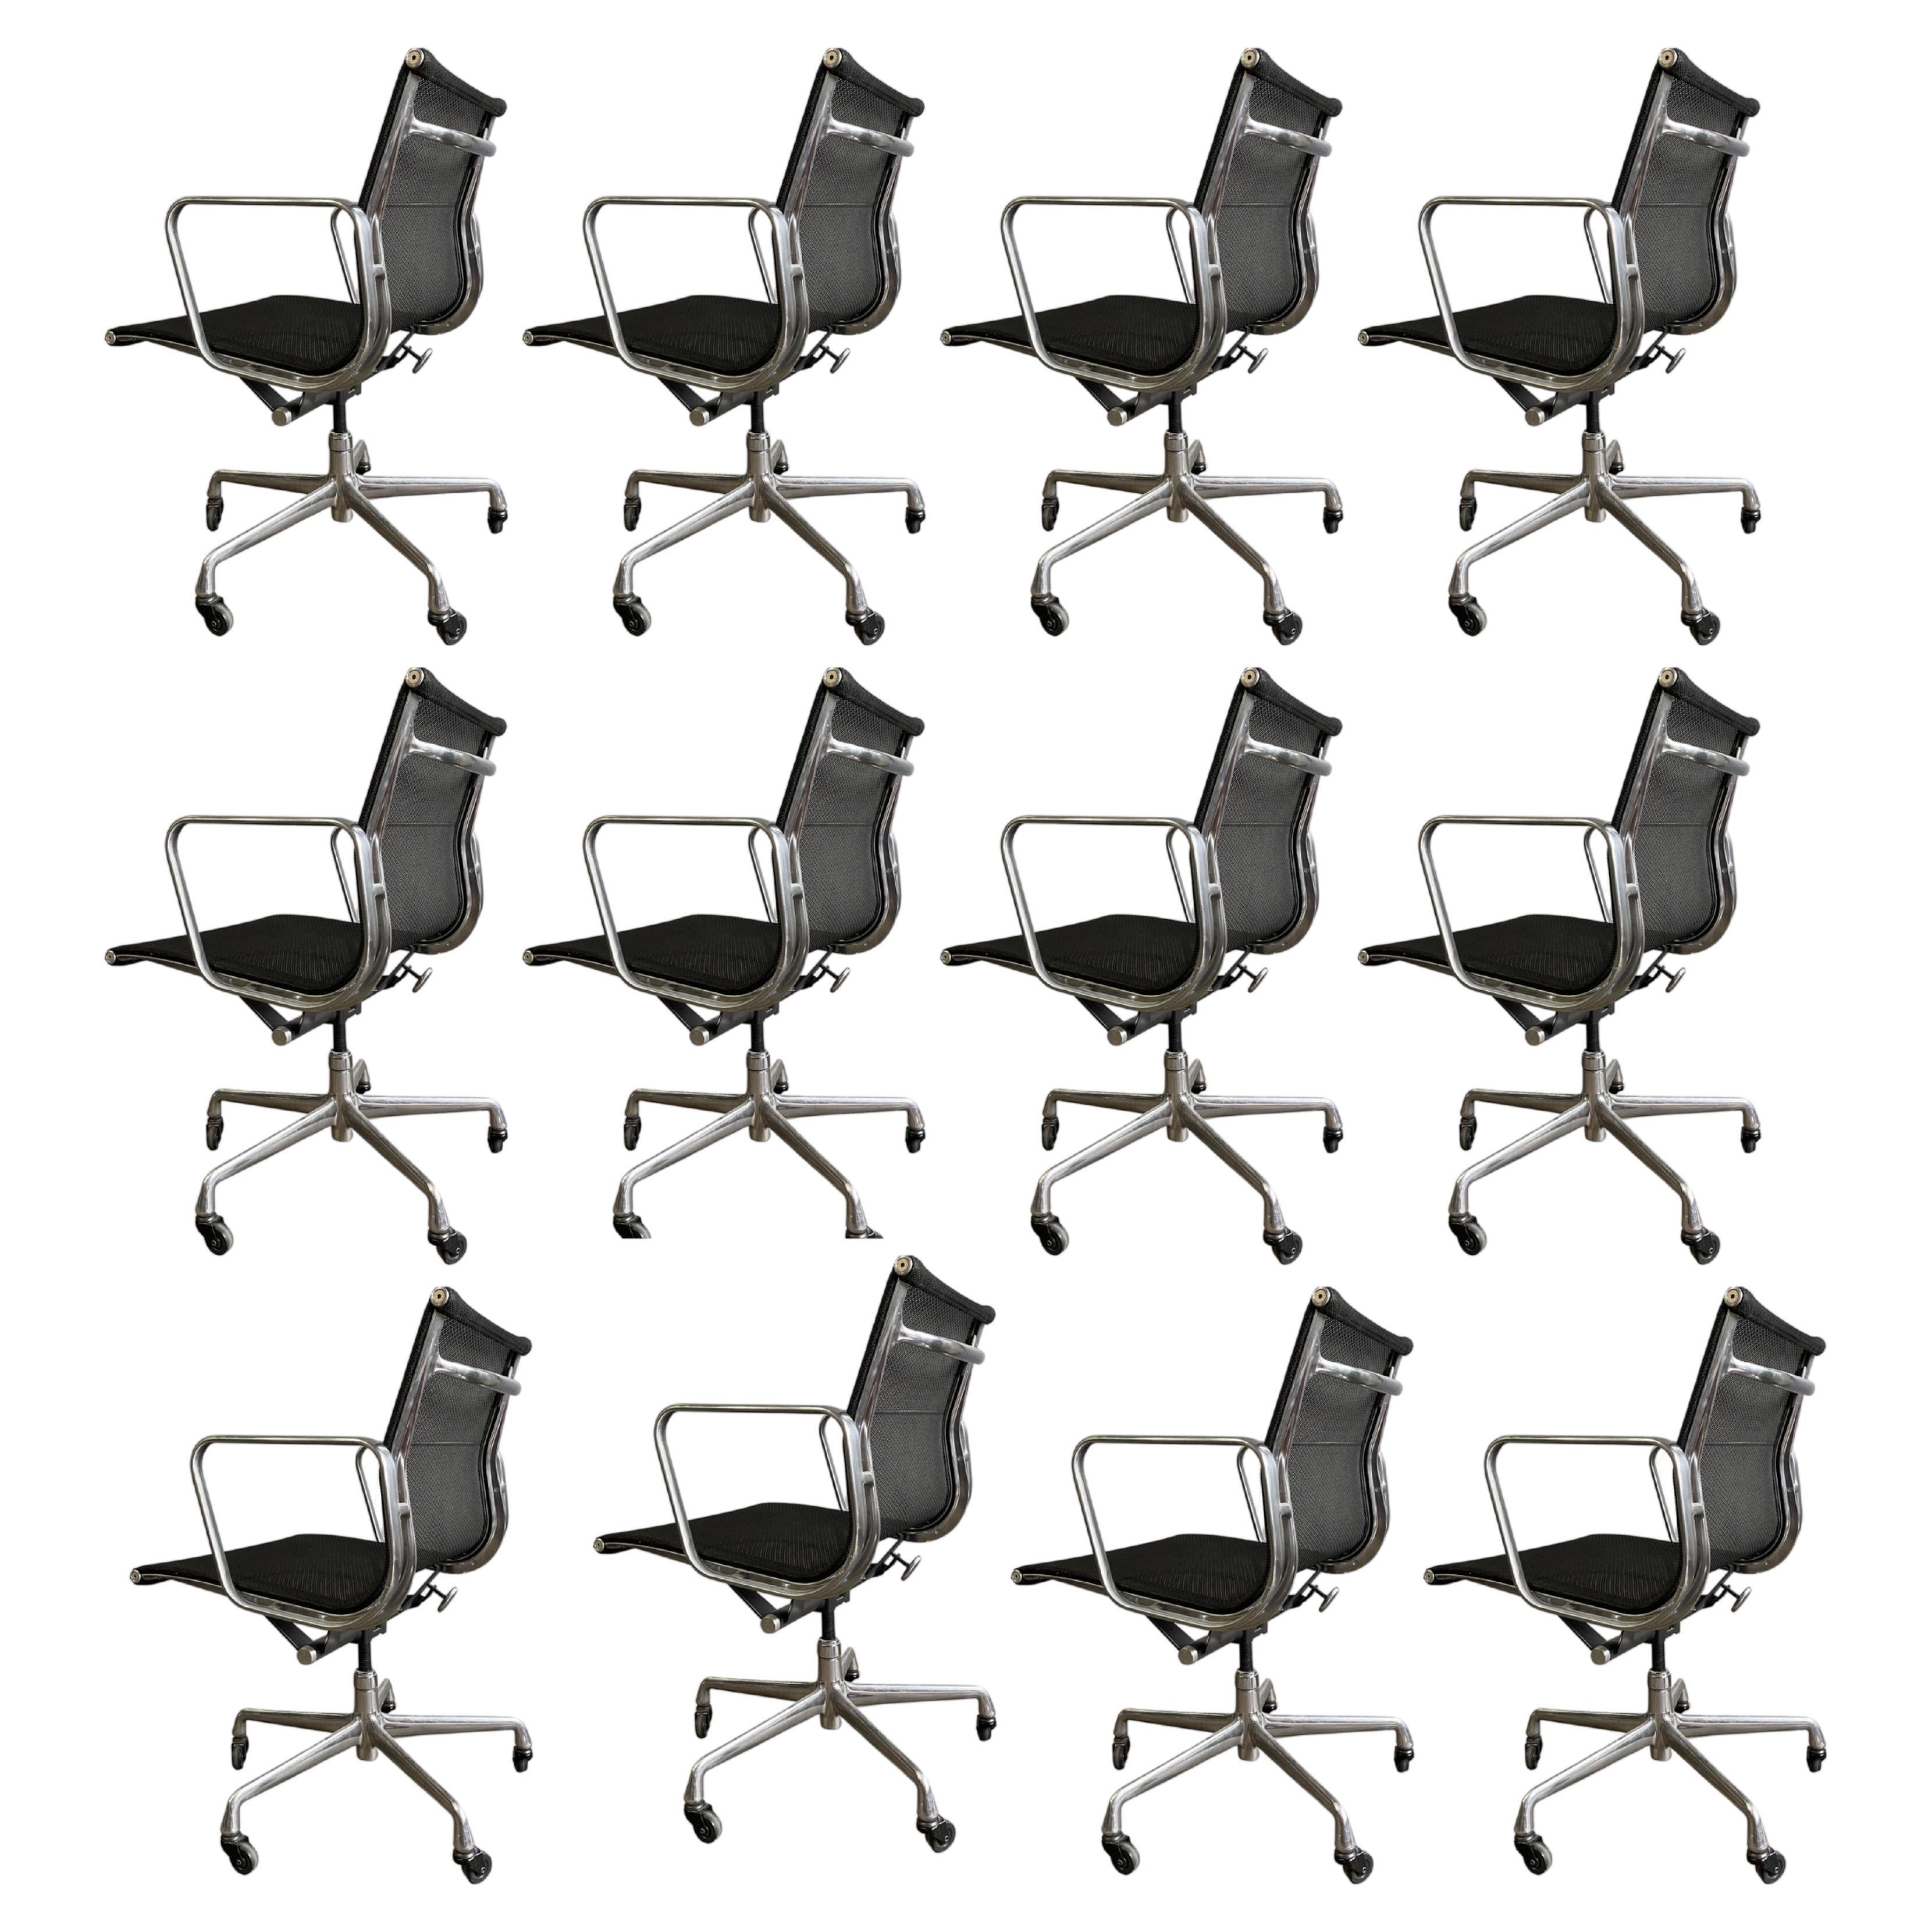 For your consideration are up to 40 Aluminium Group Management chairs in black mesh designed by Eames for Herman Miller. These are the most comfortable of all Eames aluminum Group chairs and have more of a Post-Modern look. All in very good original